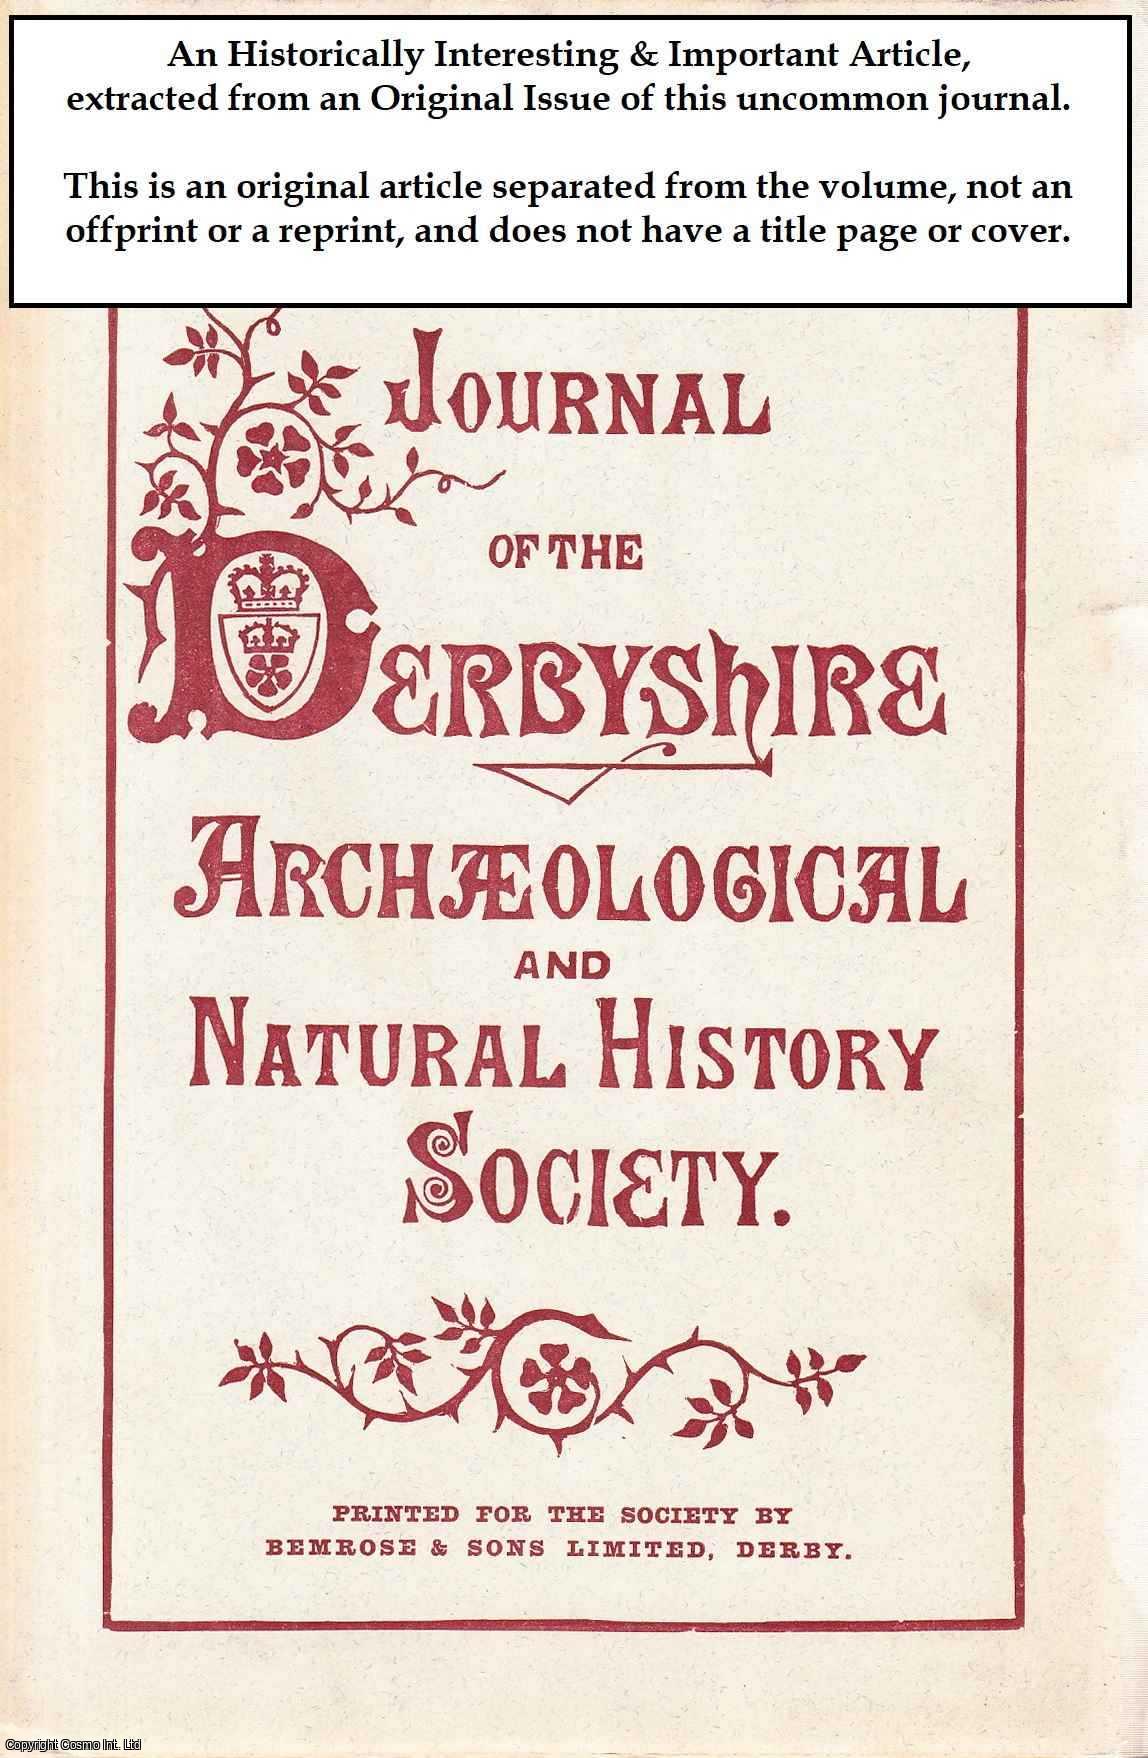 Francis C. R. Jourdain - The Restoration of Ashburne Church, Derbyshire 1881-1882. An original article from the Journal of the Derbyshire Archaeological & Natural History Society, 1883.